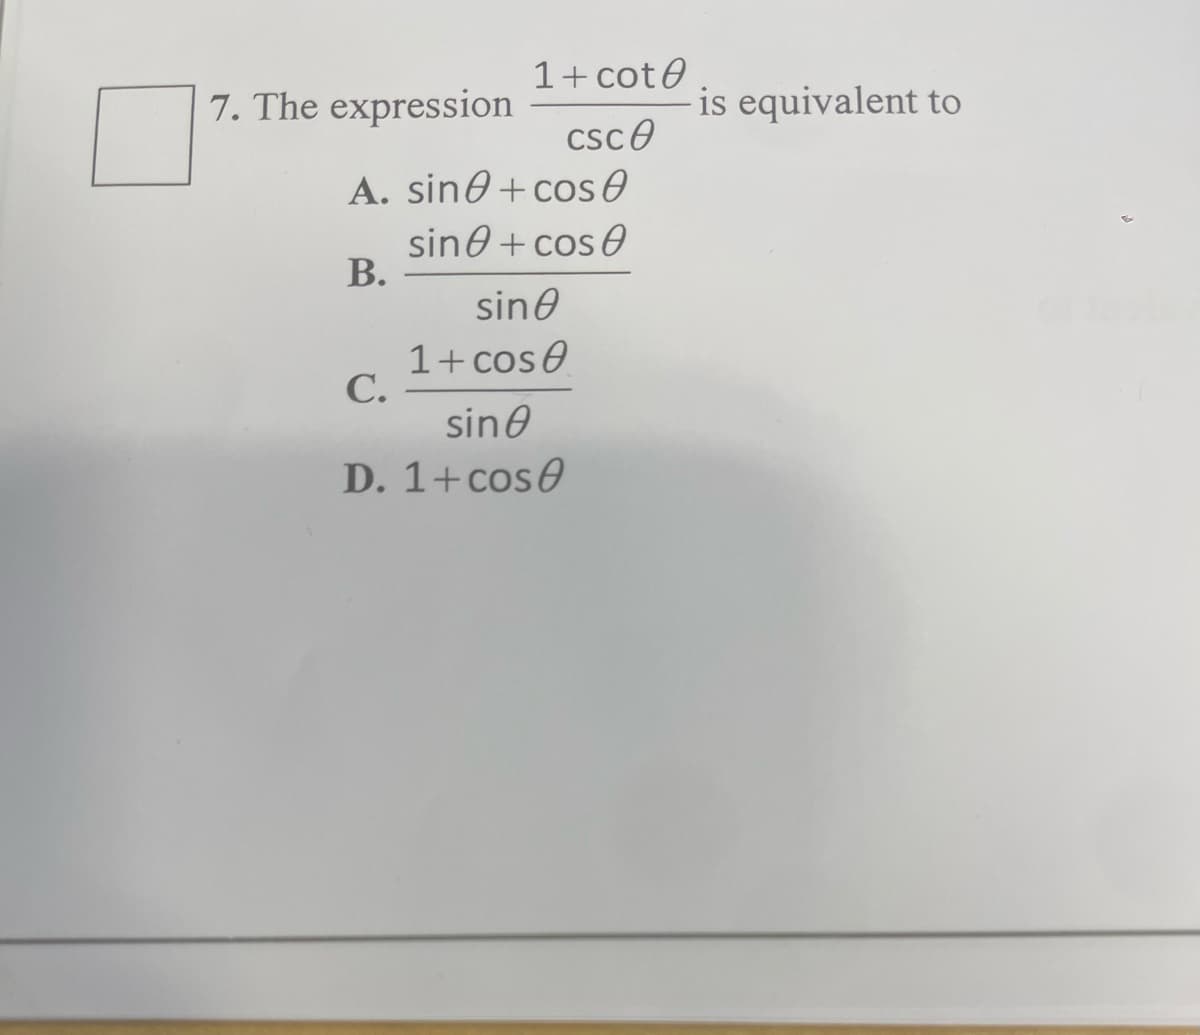 7. The expression
1+ cote
csc0
A. sin + cos
sine + cos
B.
sine
1+ cose
C.
sine
D. 1+ cose
is equivalent to